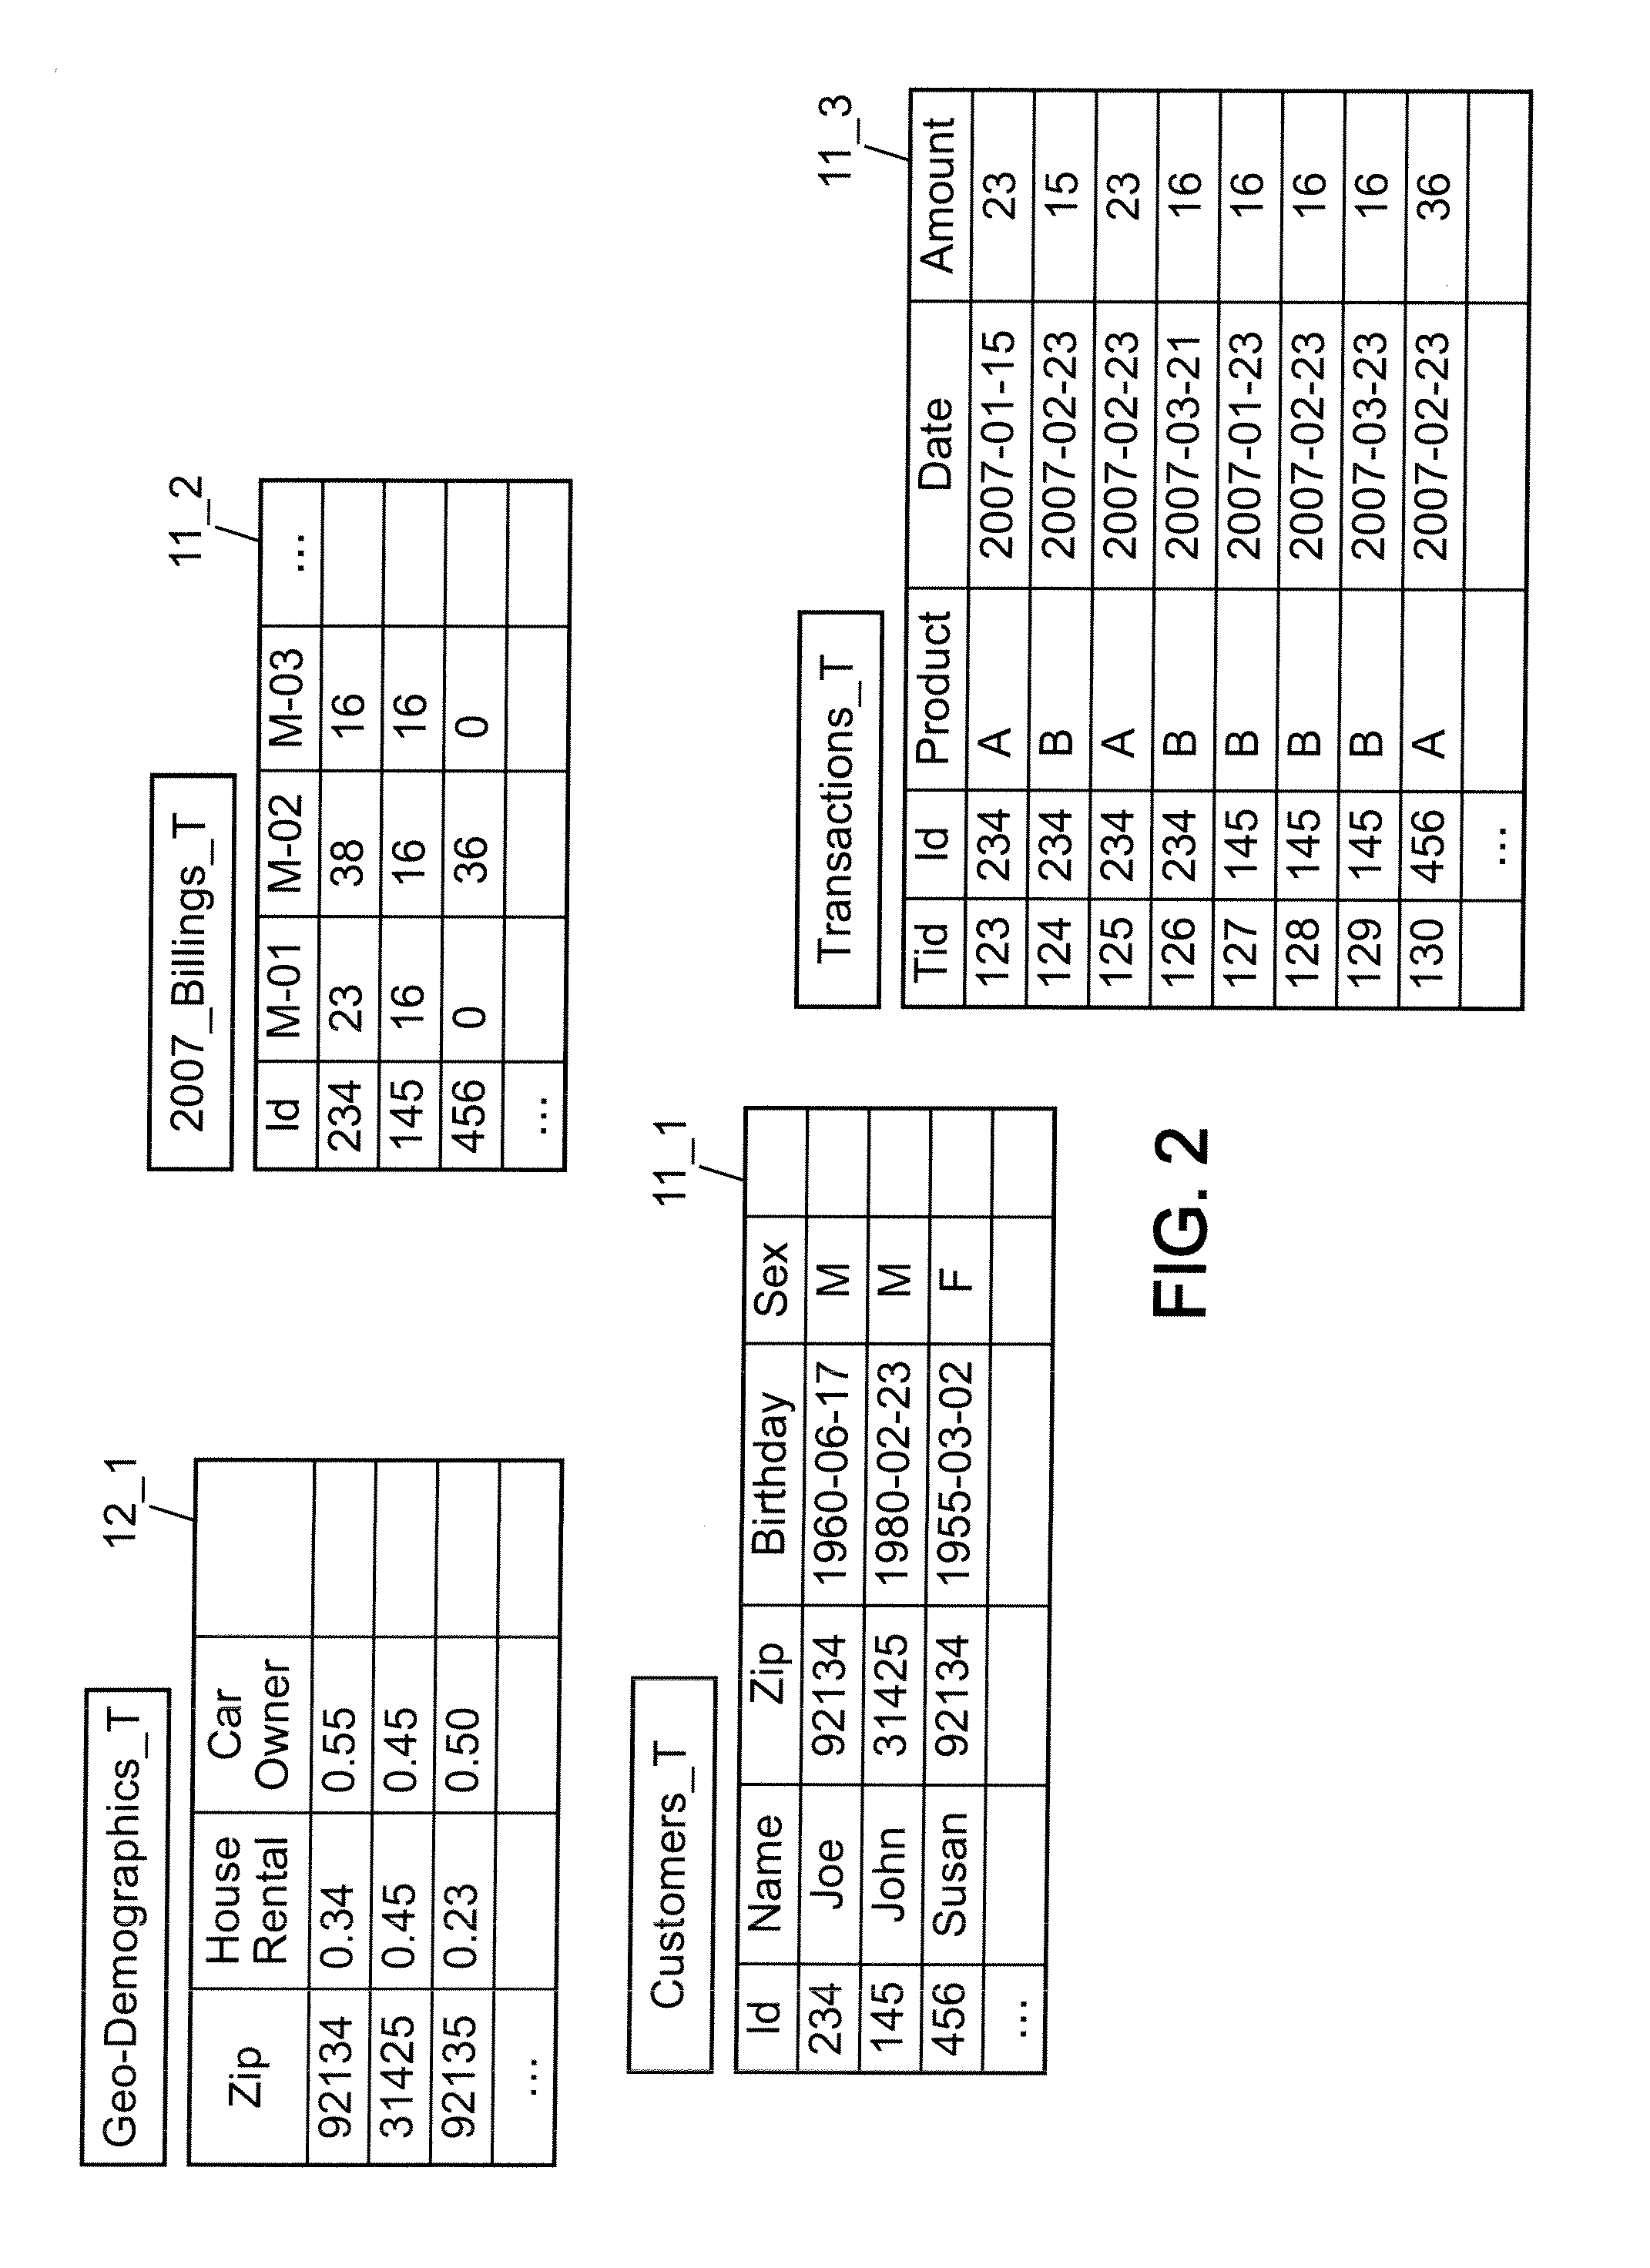 Method Of Generating An Analytical Data Set For Input Into An Analytical Model